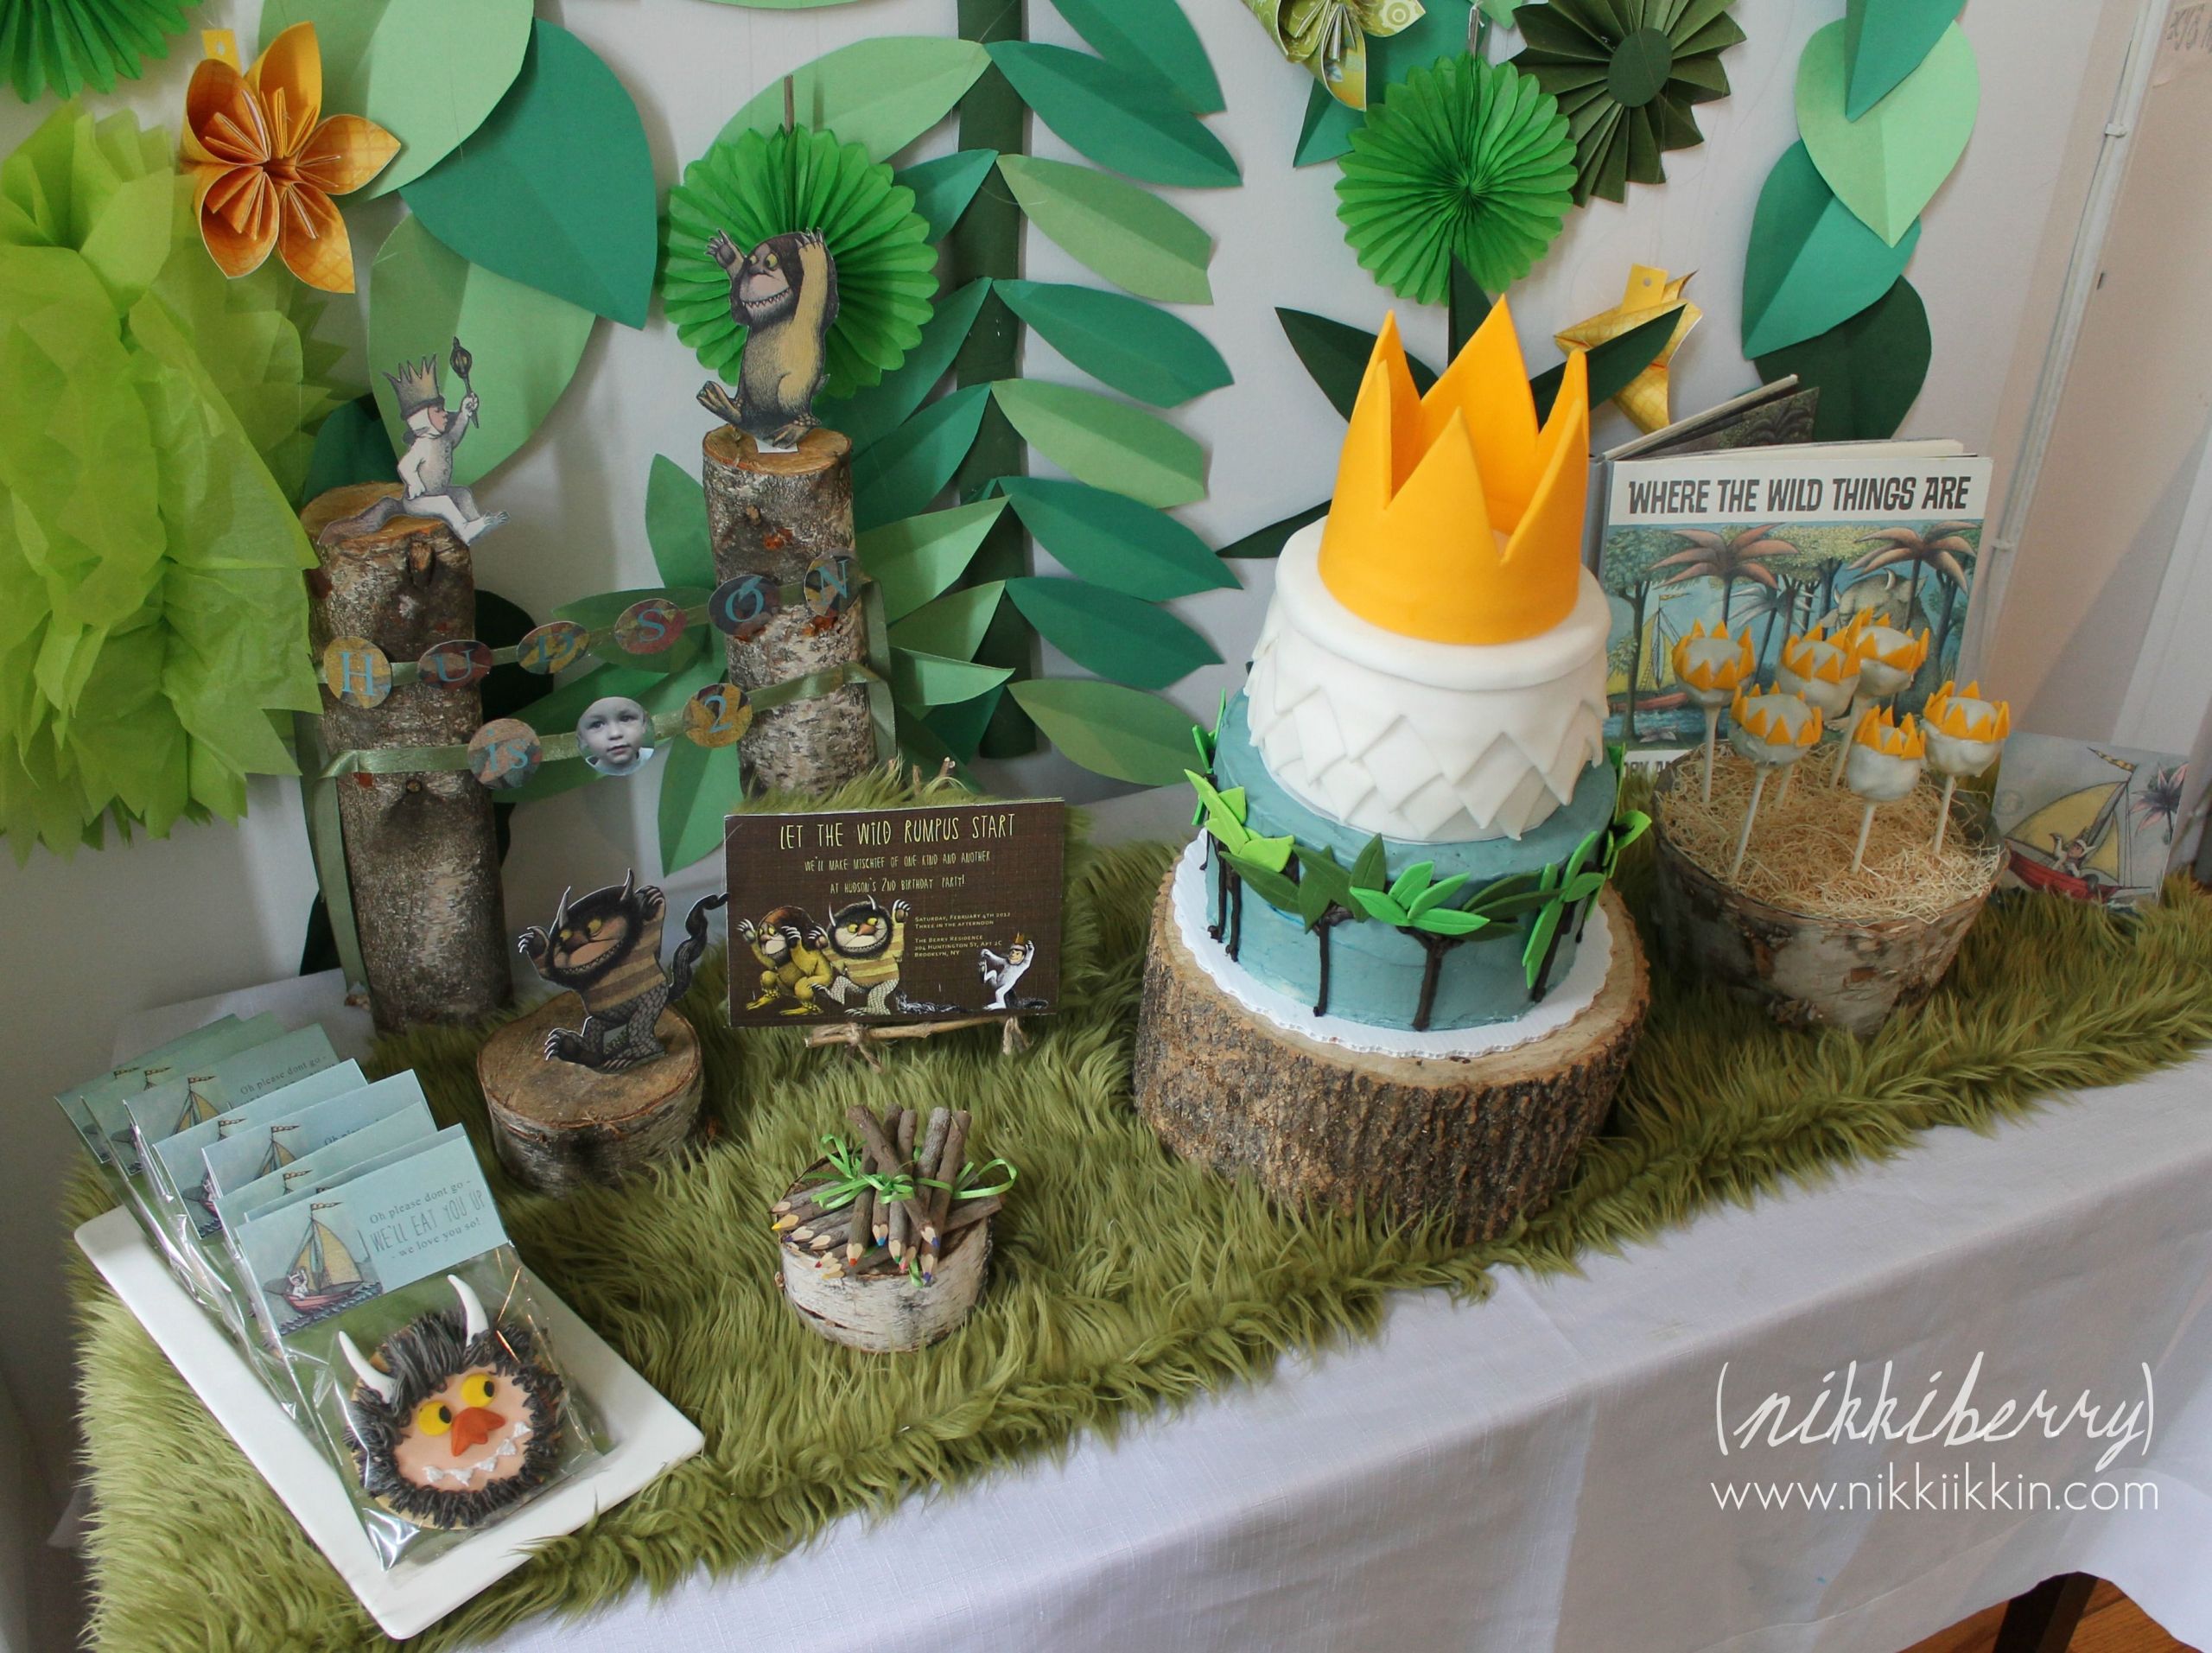 Where The Wild Things Are Birthday Party Supplies
 Where The Wild Things Are Party NikkiikkiN